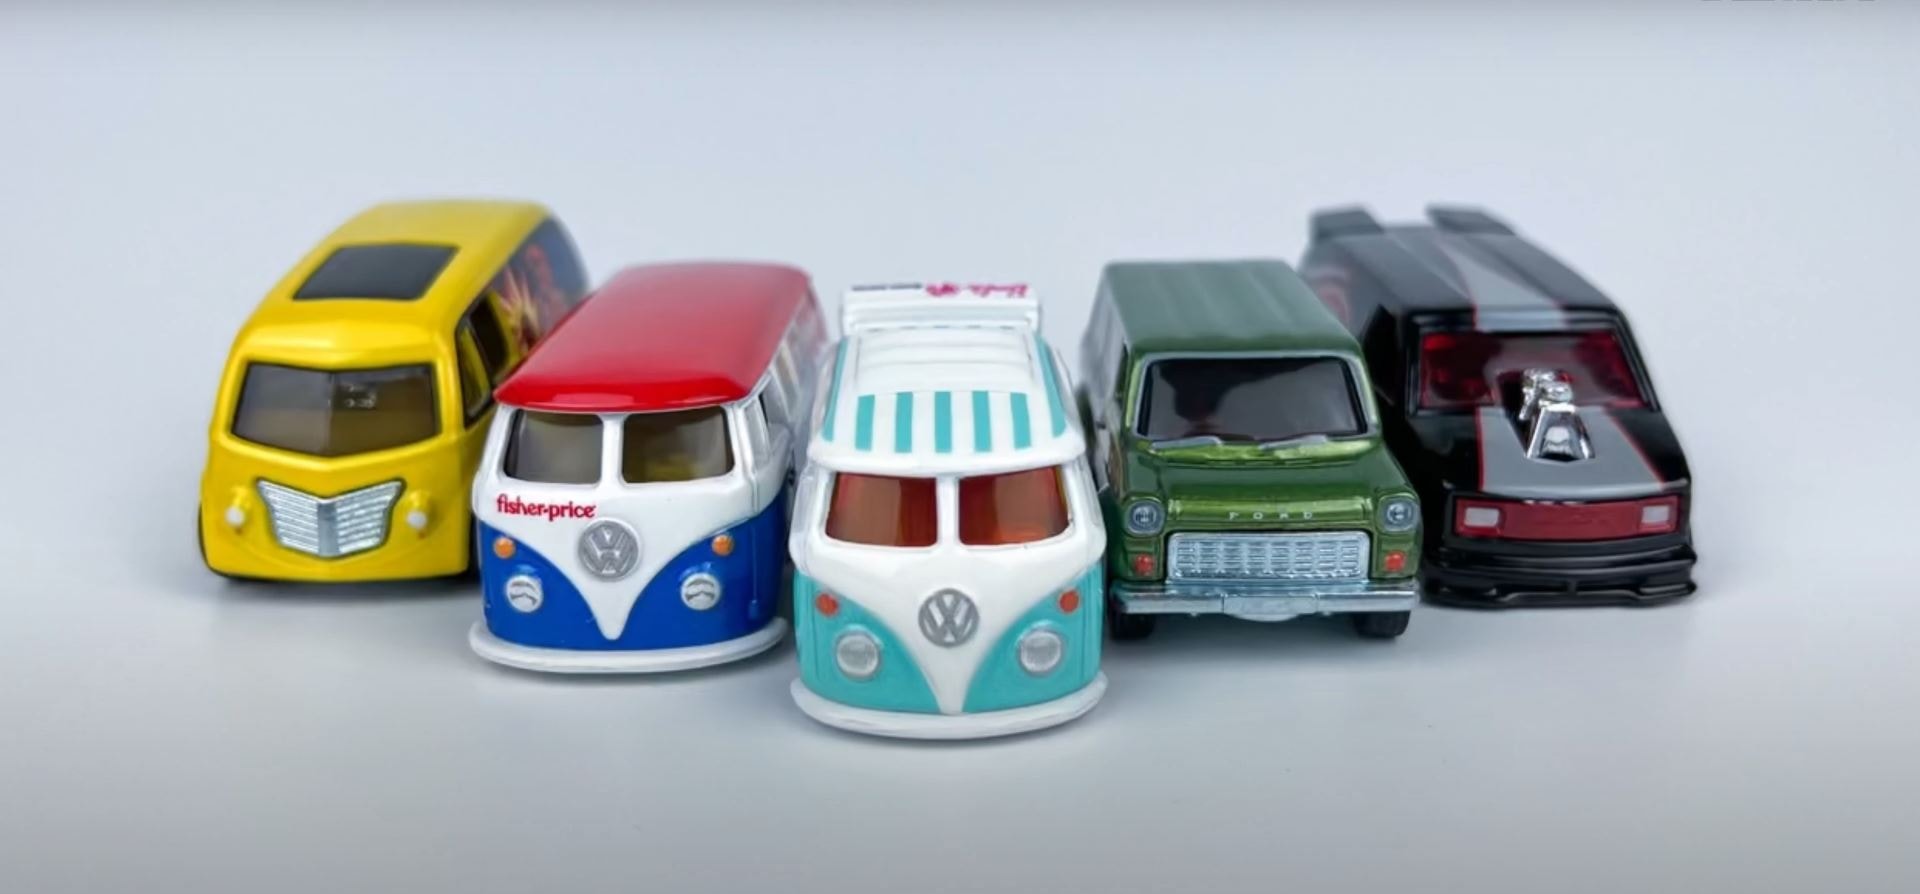 New Hot Wheels Premium Series of Five Cars Is a Celebration of All Things  Mattel - autoevolution